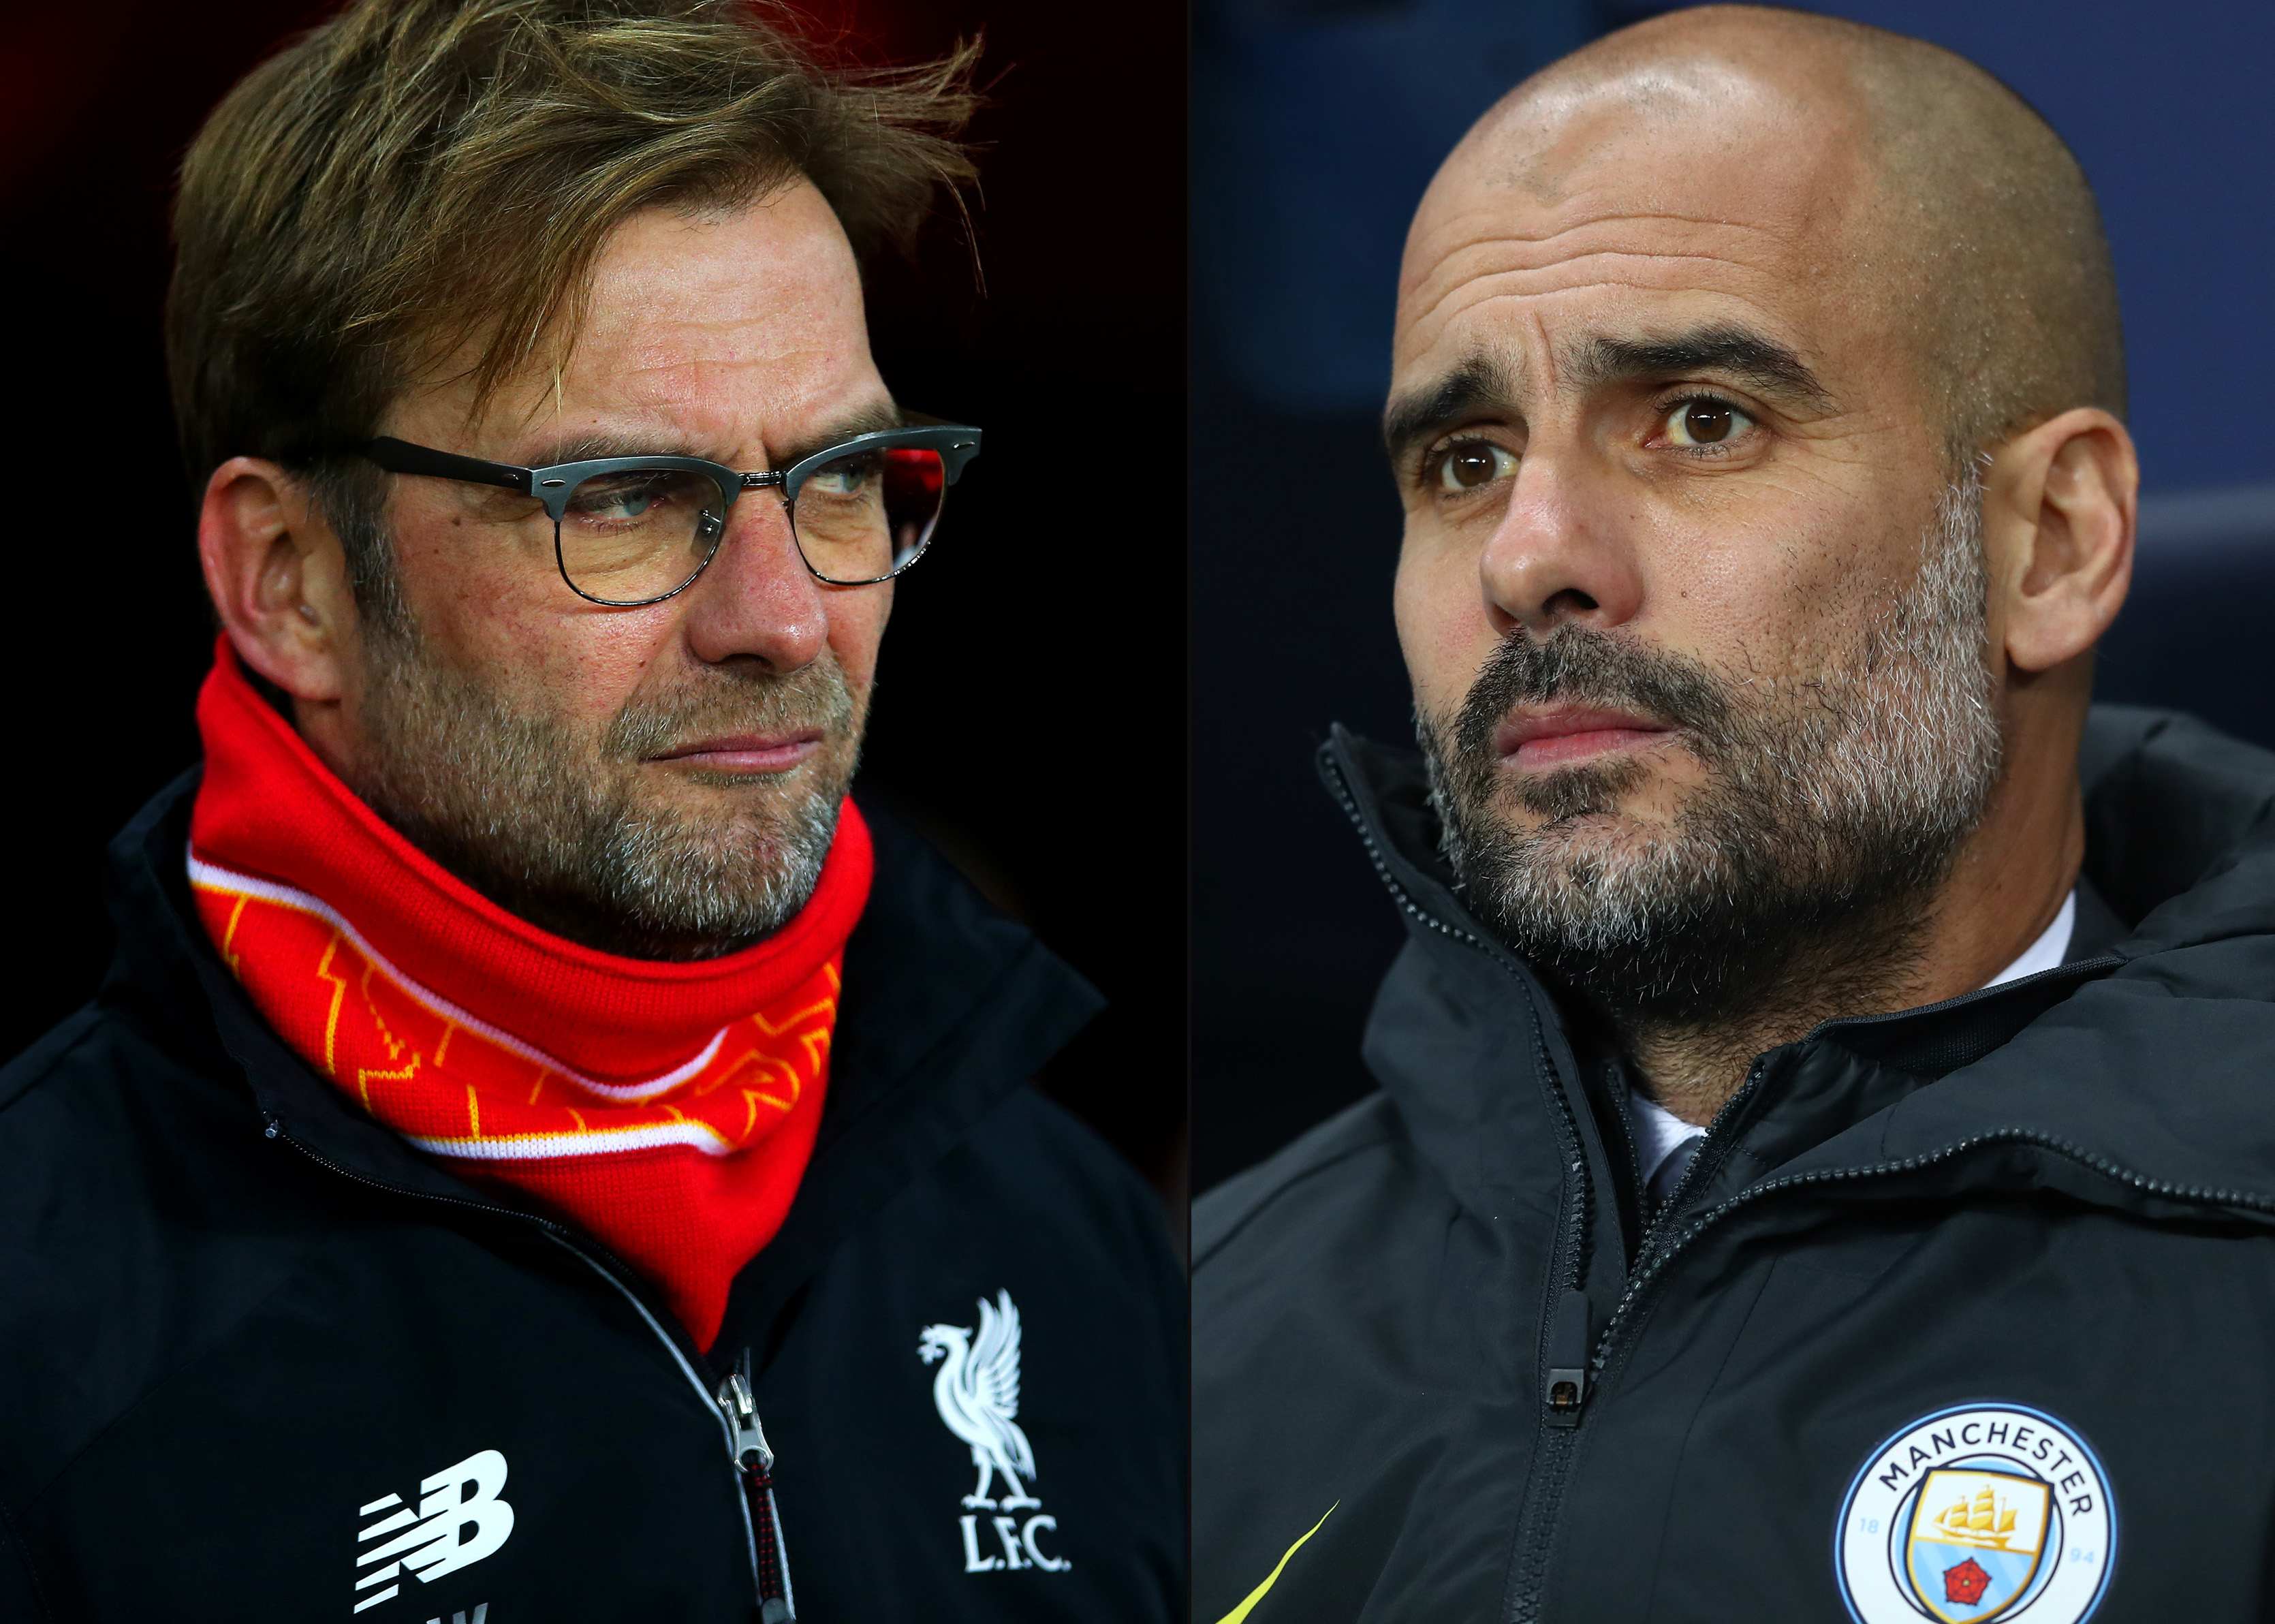 FILE PHOTO (EDITORS NOTE: COMPOSITE OF TWO IMAGES - Image numbers (L) 502929058 and 629845764) In this composite image a comparision has been made between Jurgen Klopp, manager of Liverpool (L) and Josep Guardiola, Manager of Manchester City. Liverpool and Manchester City meet in a Premier League match at Anfleid on December 31, 2016.  ***LEFT IMAGE*** SUNDERLAND, ENGLAND - DECEMBER 30: Jurgen Klopp, manager of Liverpool looks on before the Barclays Premier League match between Sunderland and Liverpool at Stadium of Light on December 30, 2015 in Sunderland, England. (Photo by Ian MacNicol/Getty Images) ***RIGHT IMAGE*** MANCHESTER, ENGLAND - DECEMBER 14: Josep Guardiola, Manager of Manchester City looks on during the Premier League match between Manchester City and Watford at Etihad Stadium on December 14, 2016 in Manchester, England. (Photo by Michael Steele/Getty Images)